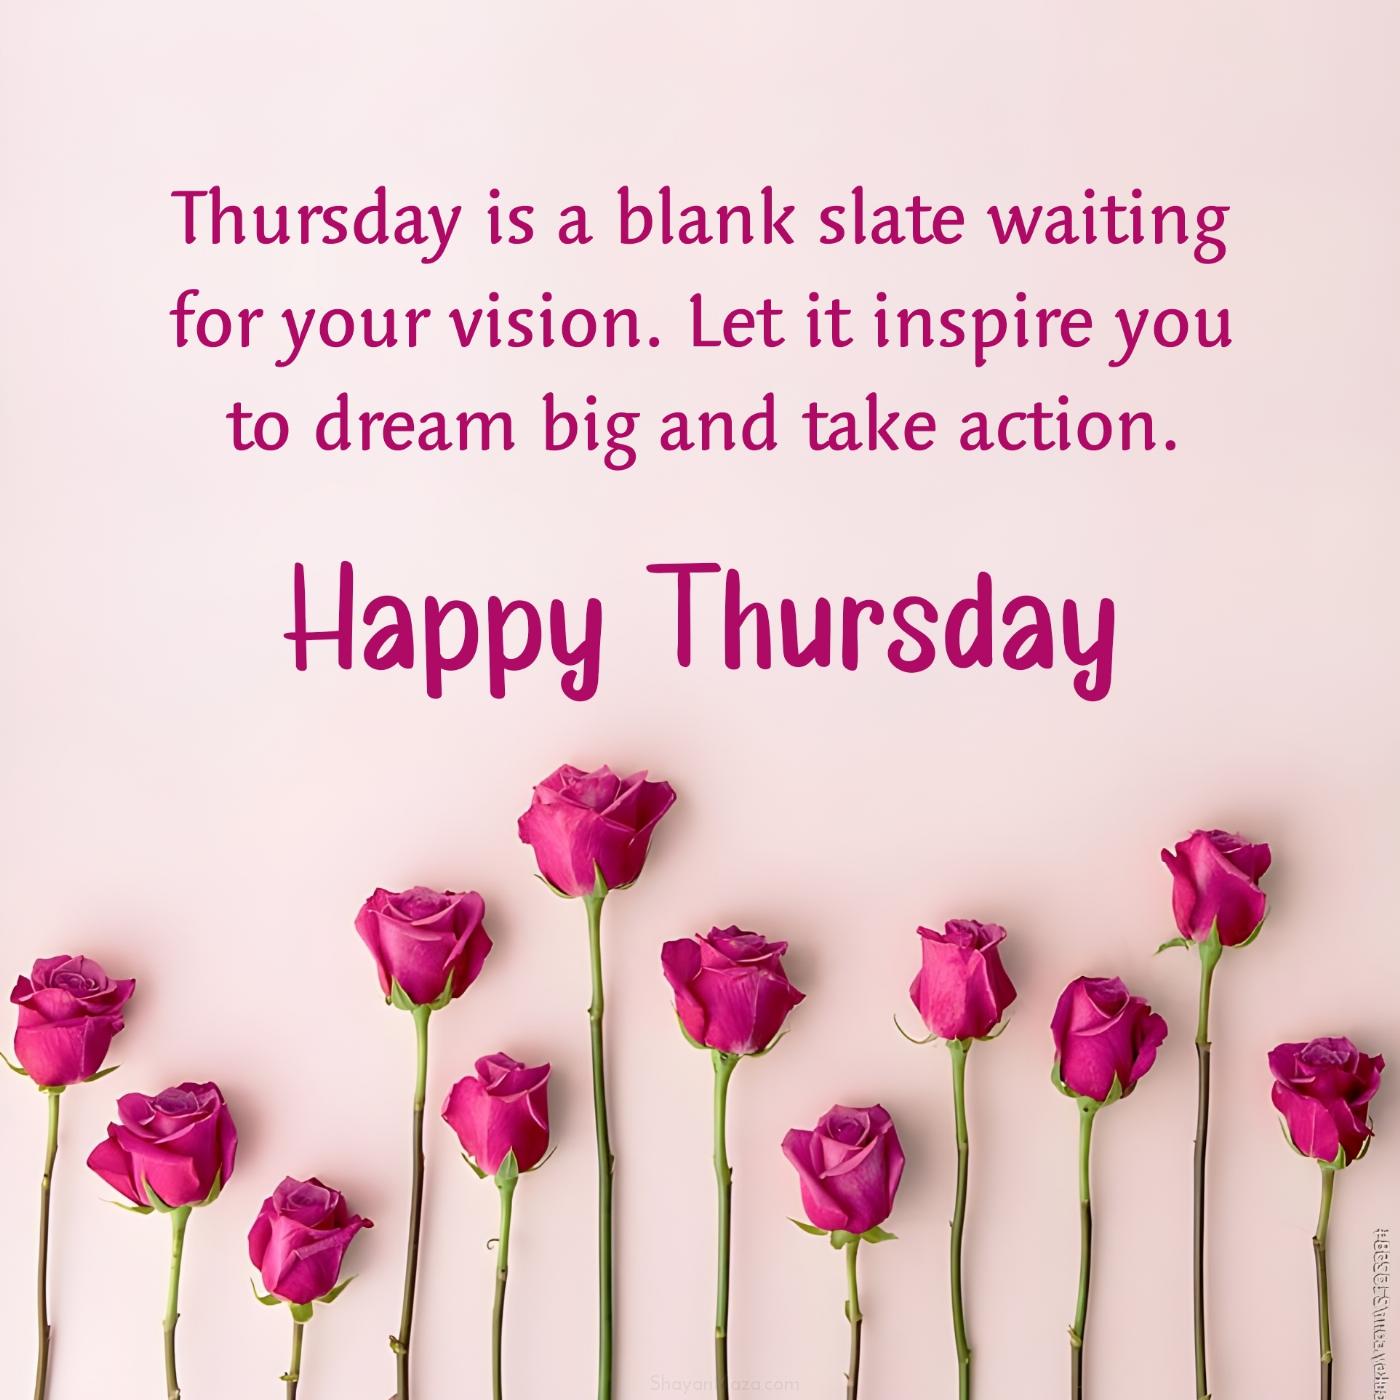 Thursday is a blank slate waiting for your vision